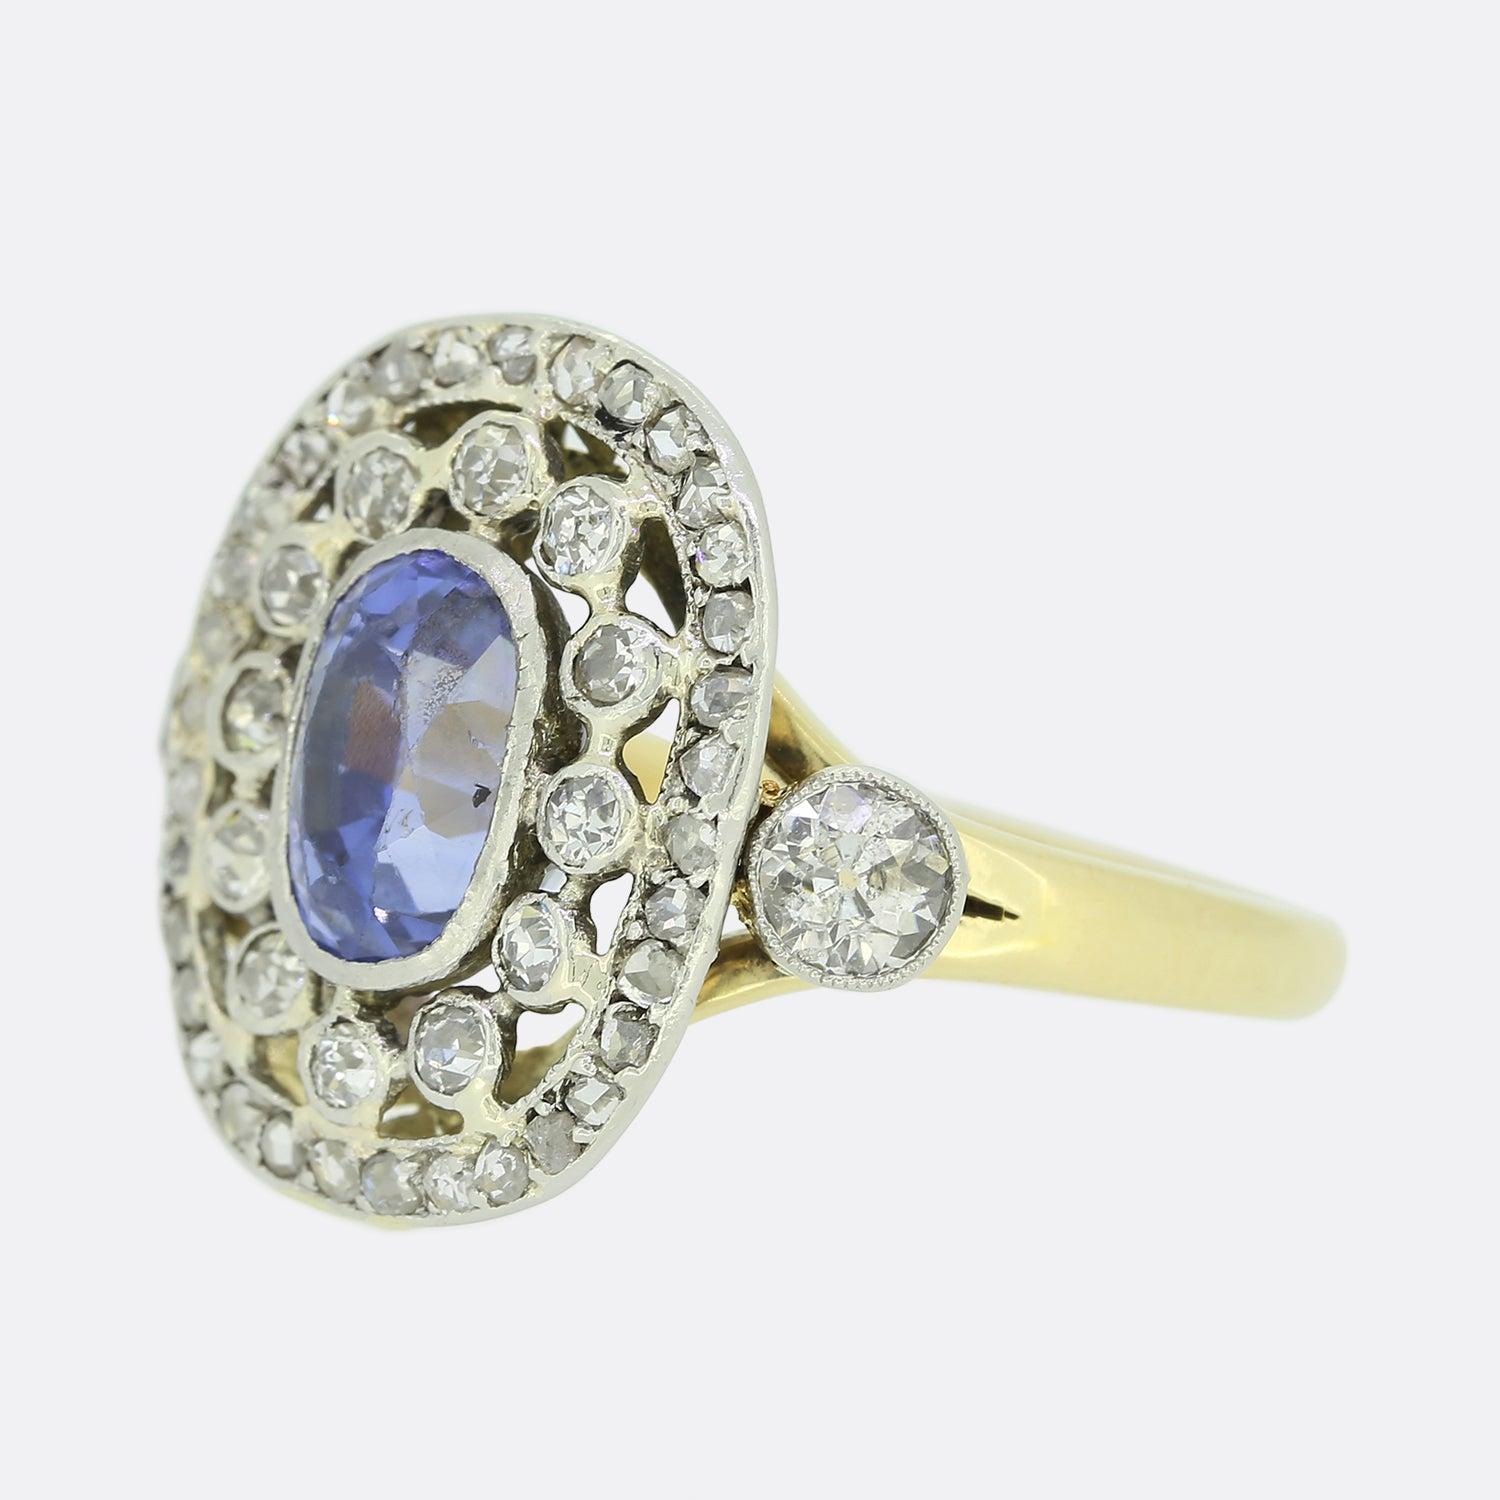 This is a marvellous 18ct yellow gold ring focally featuring a single oval shaped sapphire at the centre of the face believed to be of Ceylon origin. The ring's open, multi-layered structure presents firstly, a cluster of old cut diamonds and then a